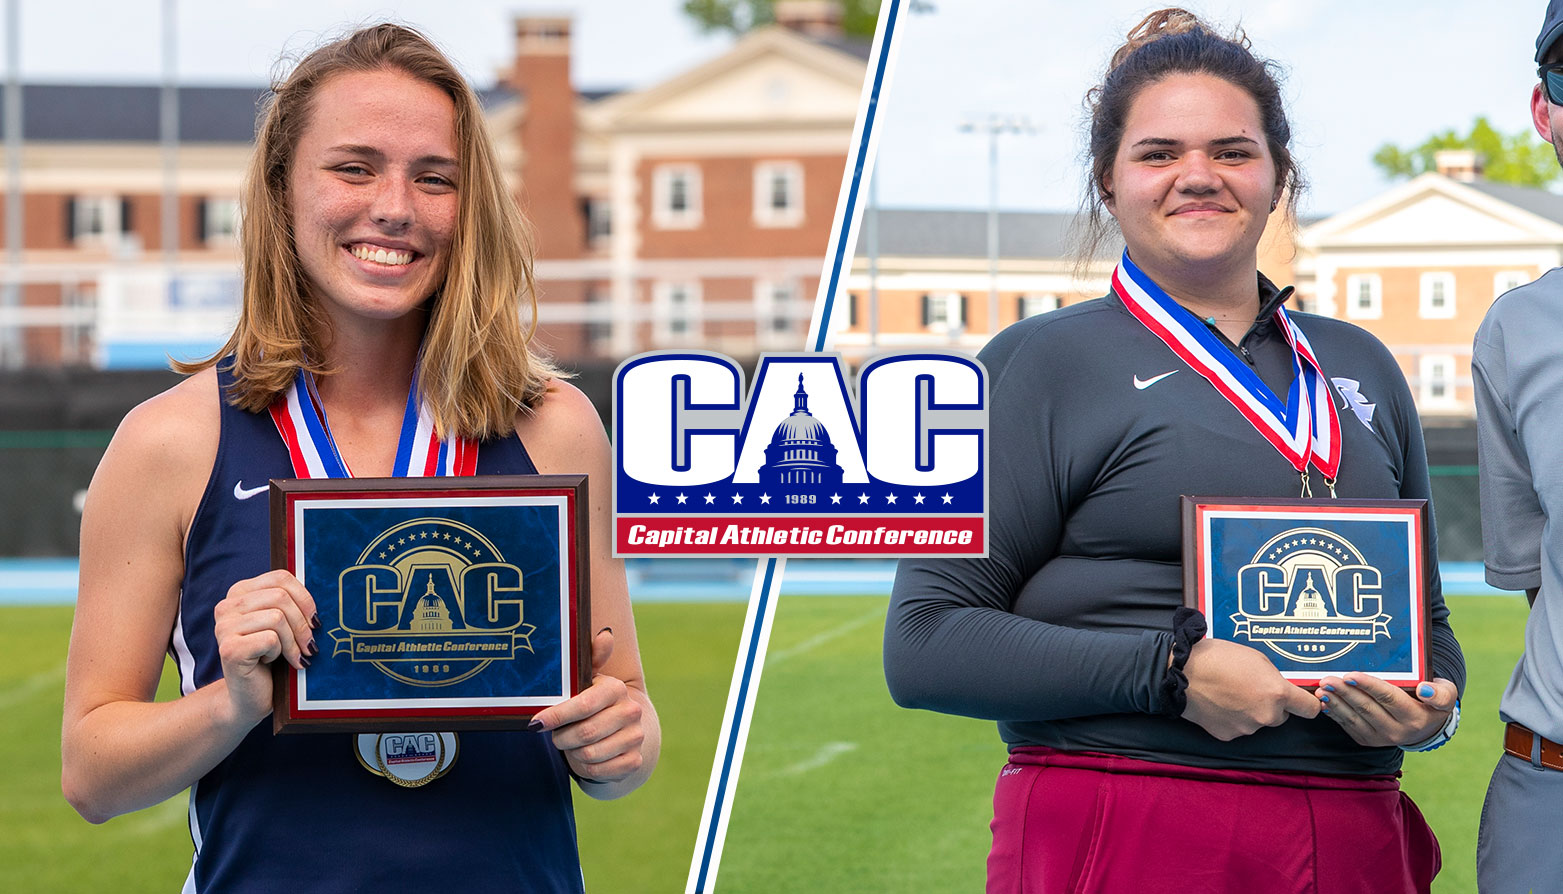 Mary Washington's Erin Andrewlevich Collects Athlete of the Year Honors to Headline 2019 CAC Outdoor T&F Awards